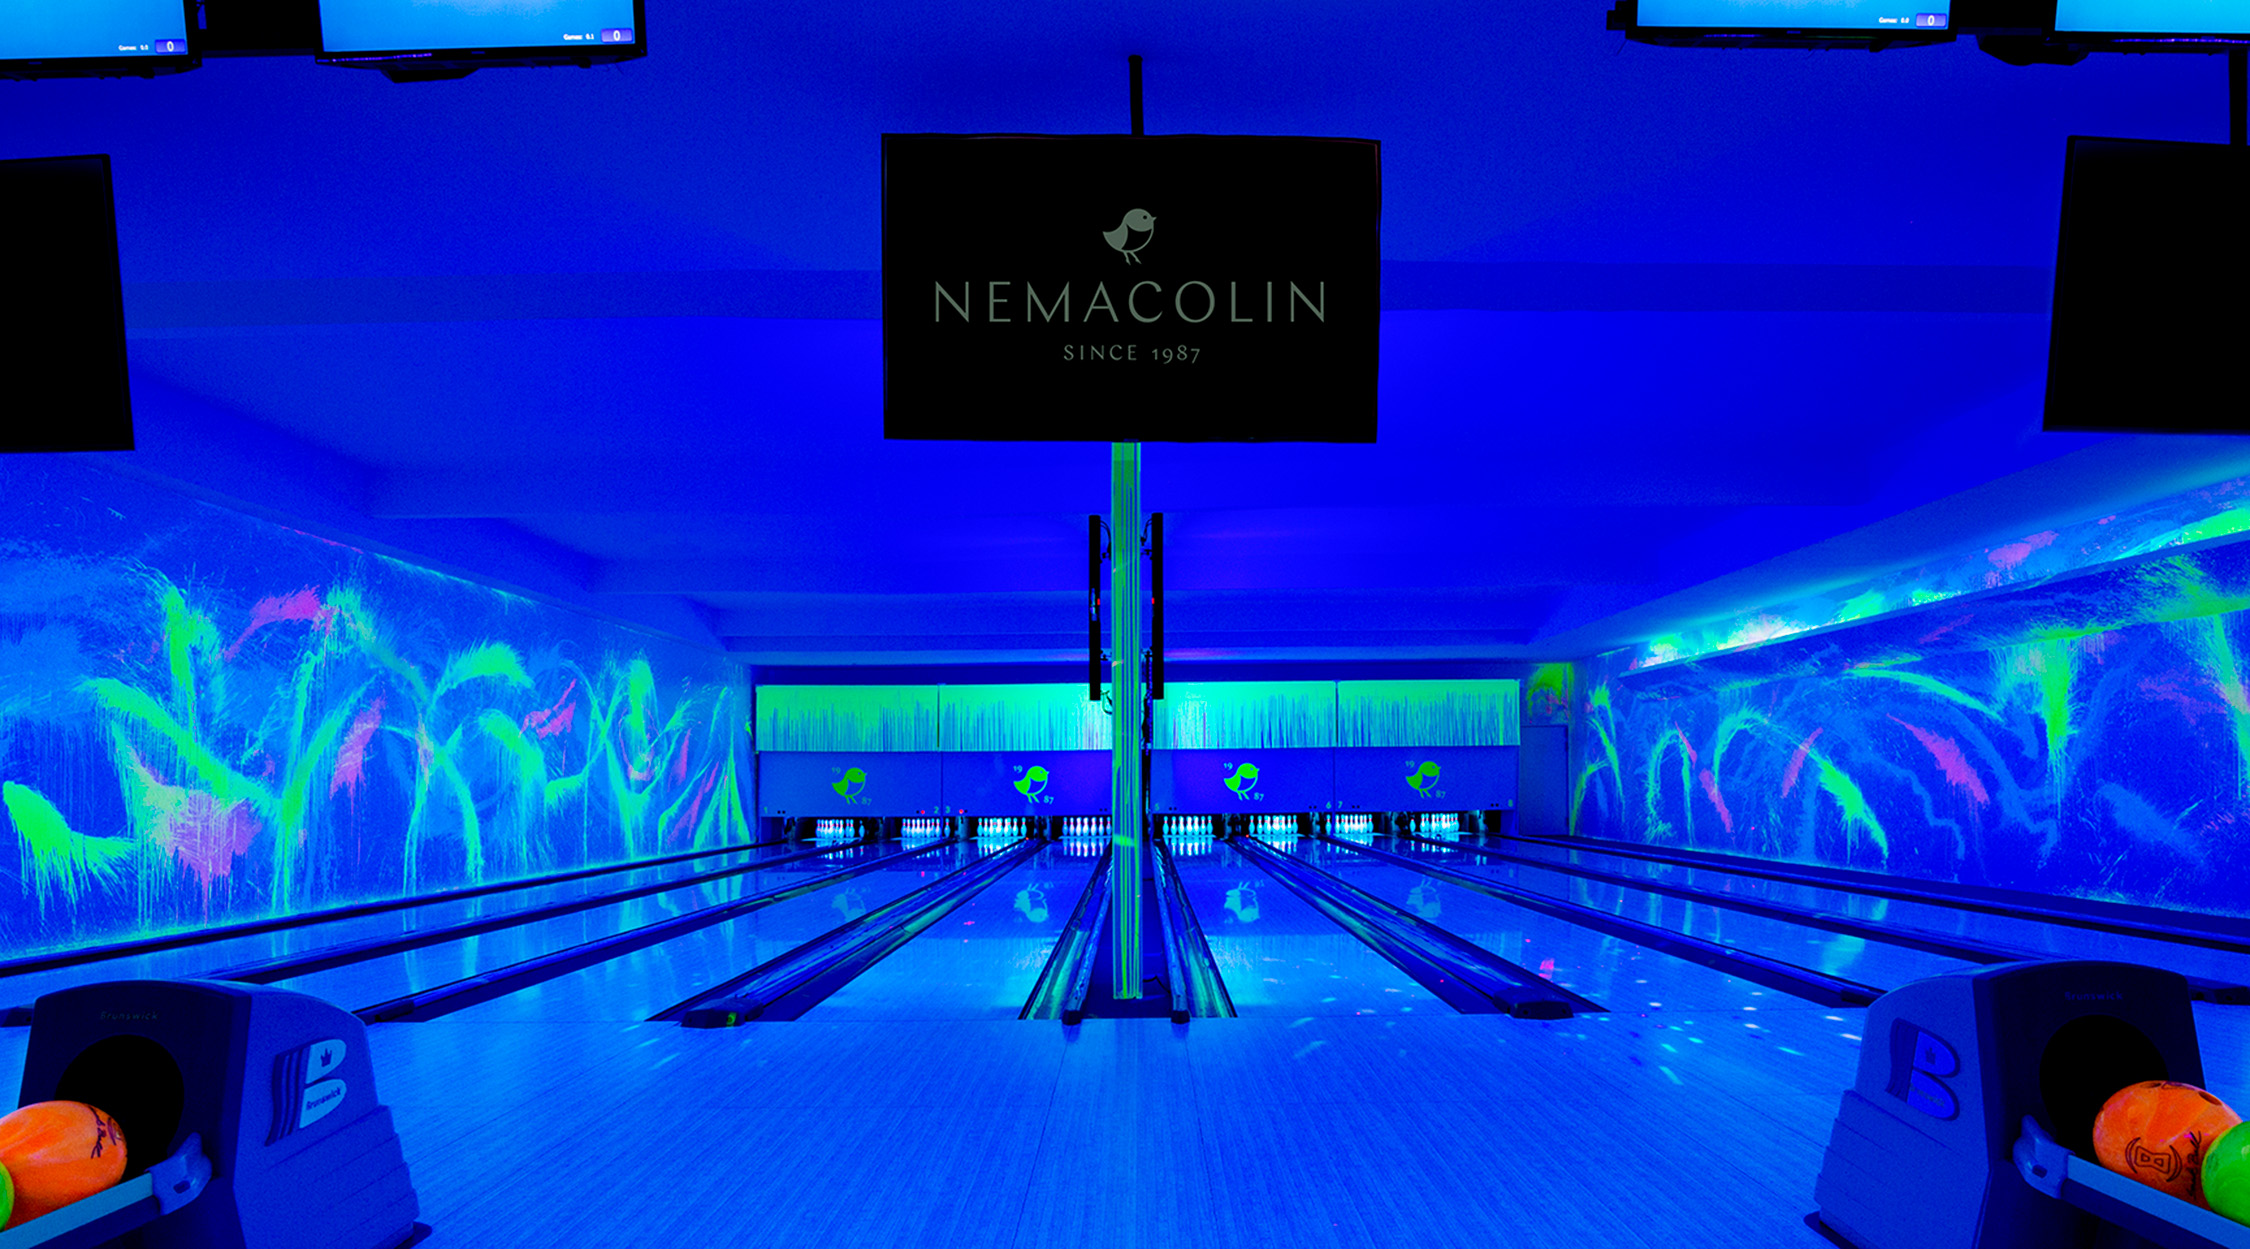 Neon-colored paint and black lights at the cosmic bowling experience at Nemacolin